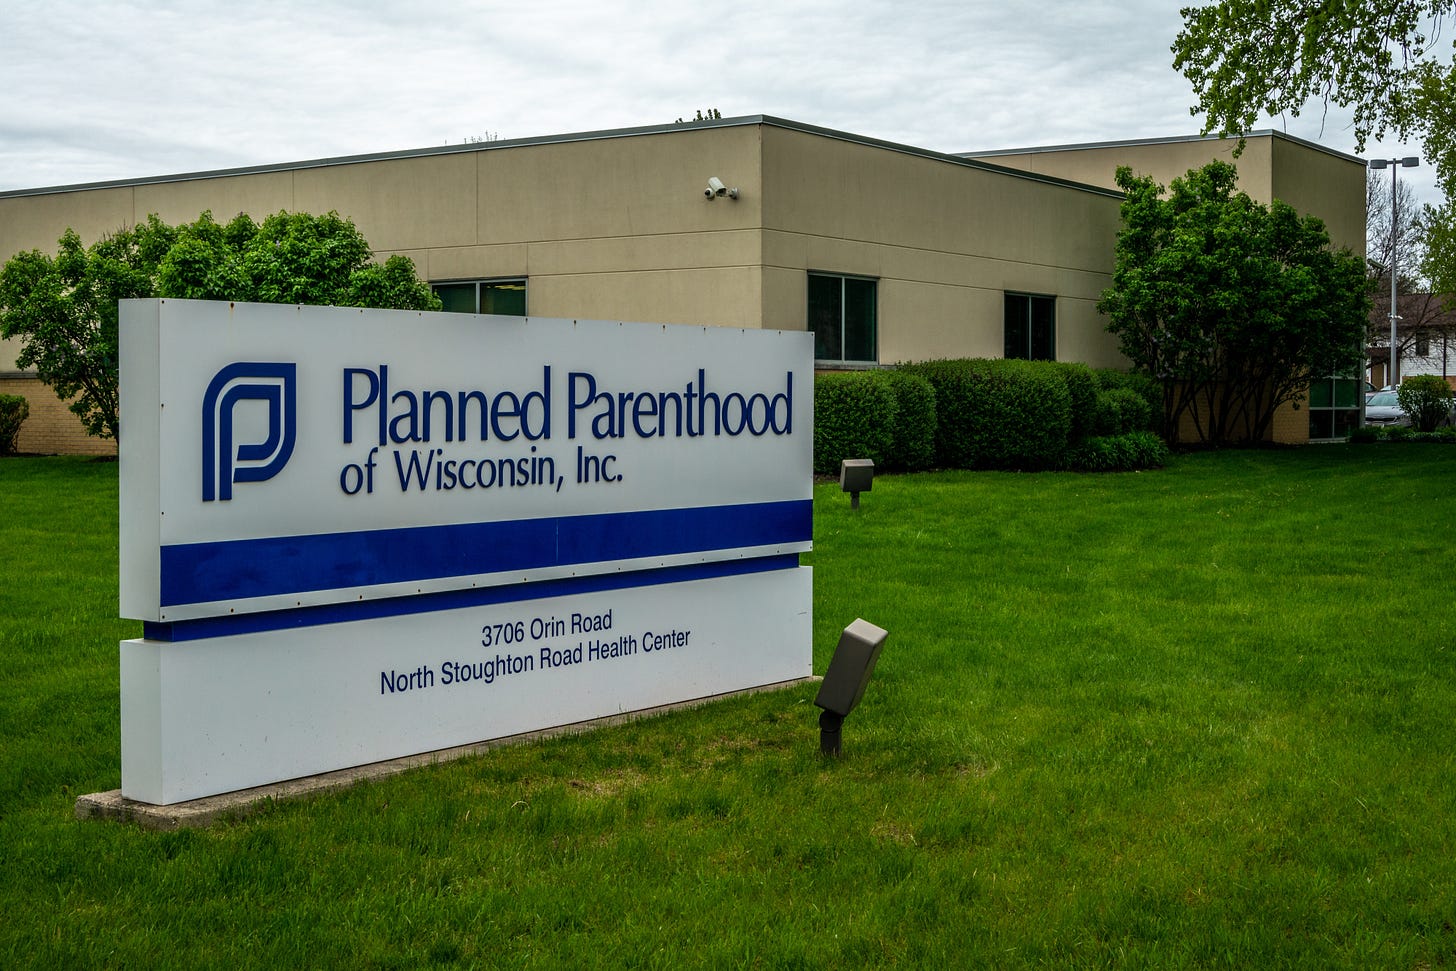 For Planned Parenthood Wisconsin, Title X Funding Ended Months Ago |  Wisconsin Public Radio